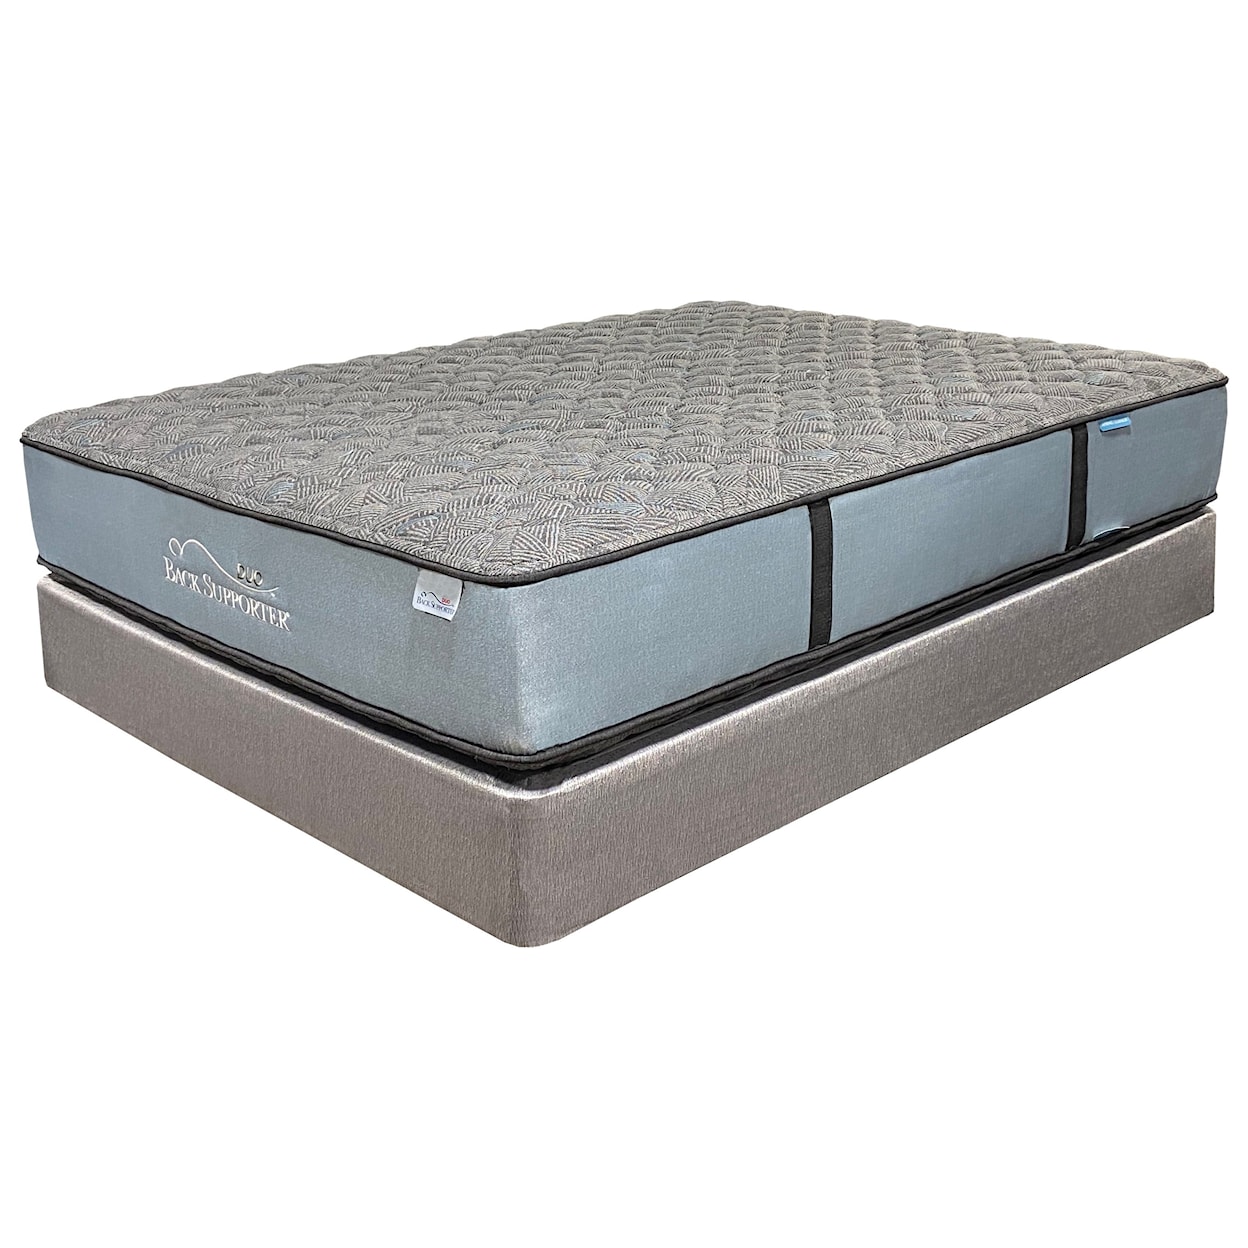 Spring Air All-Seasons Duo Haven Firm Cal King Firm Mattress